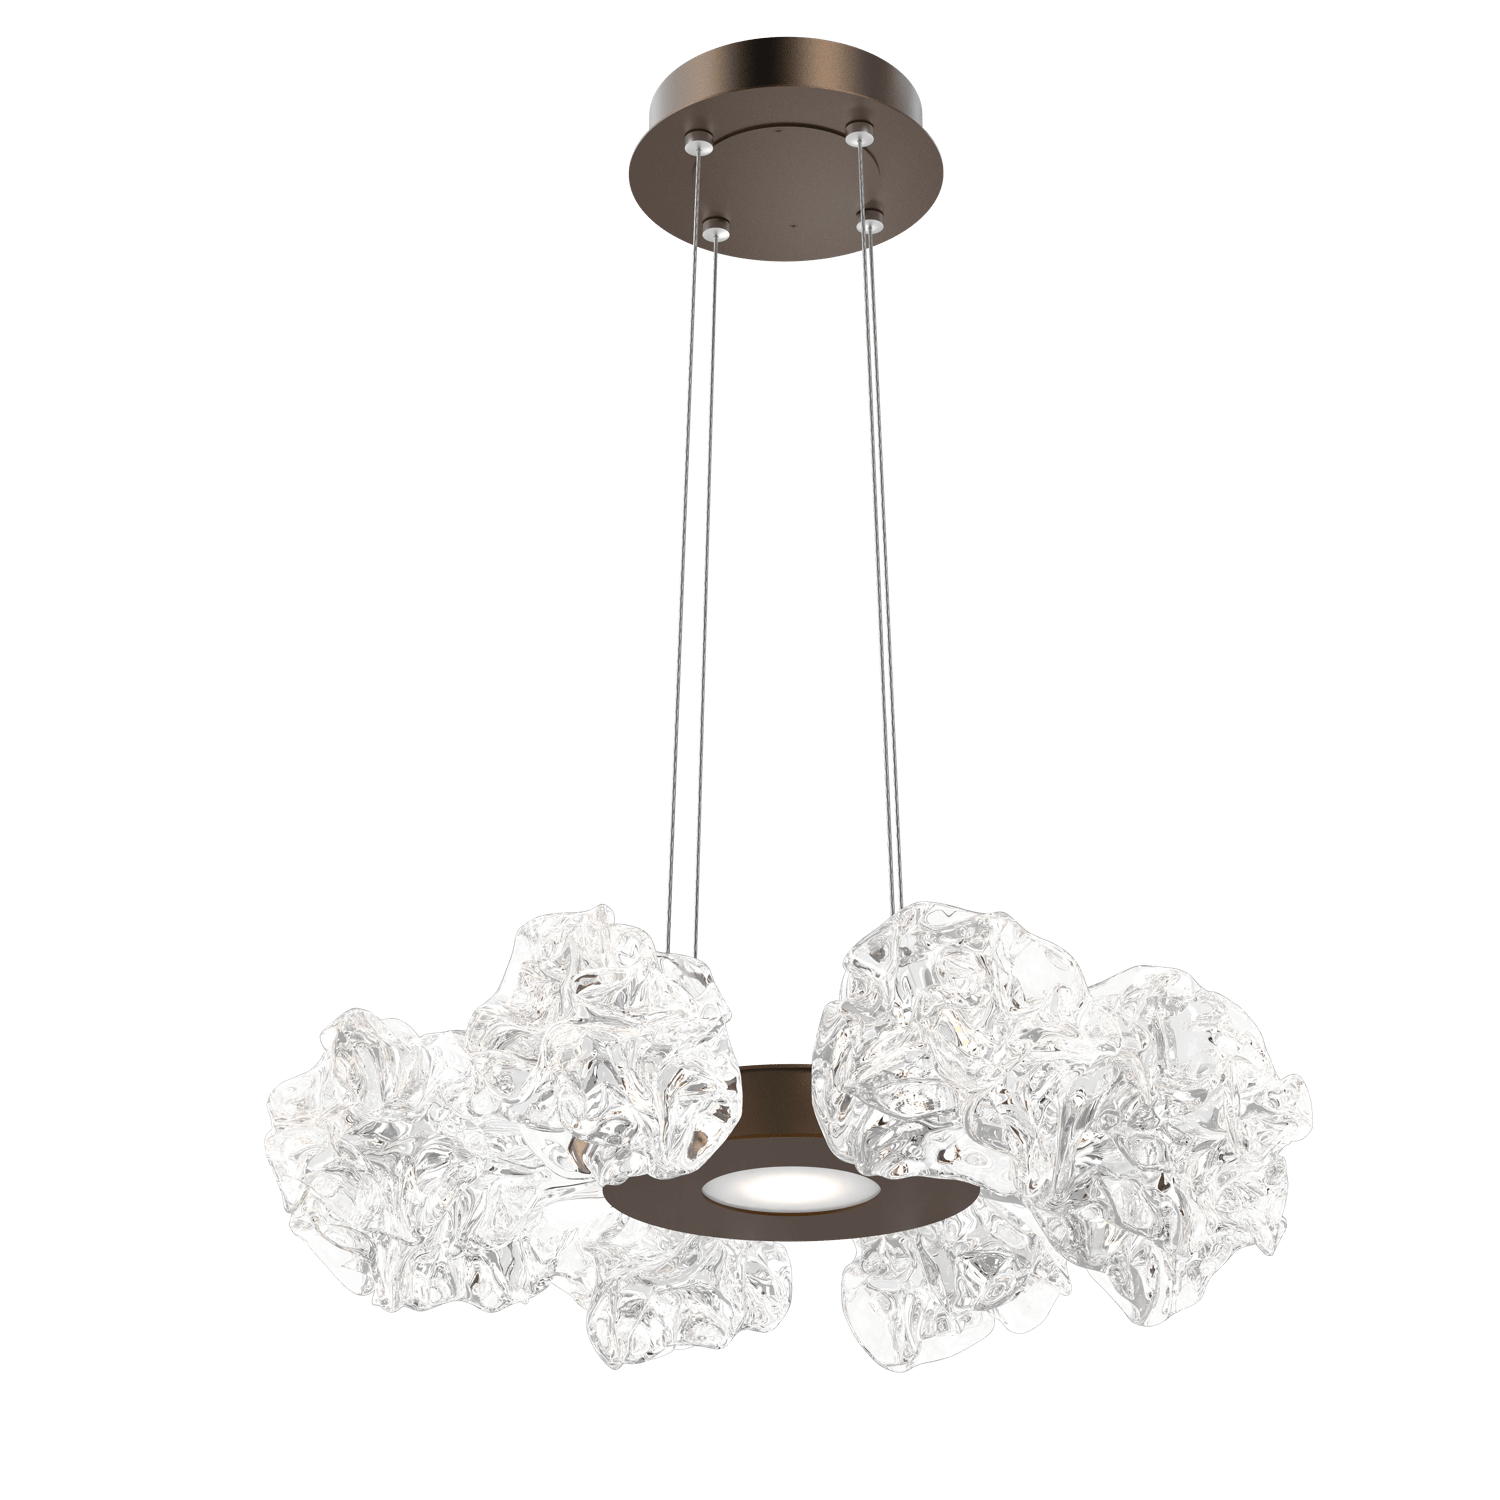 CHB0059-24-FB-Hammerton-Studio-Blossom-24-inch-radial-ring-chandelier-with-flat-bronze-finish-and-clear-handblown-crystal-glass-shades-and-LED-lamping